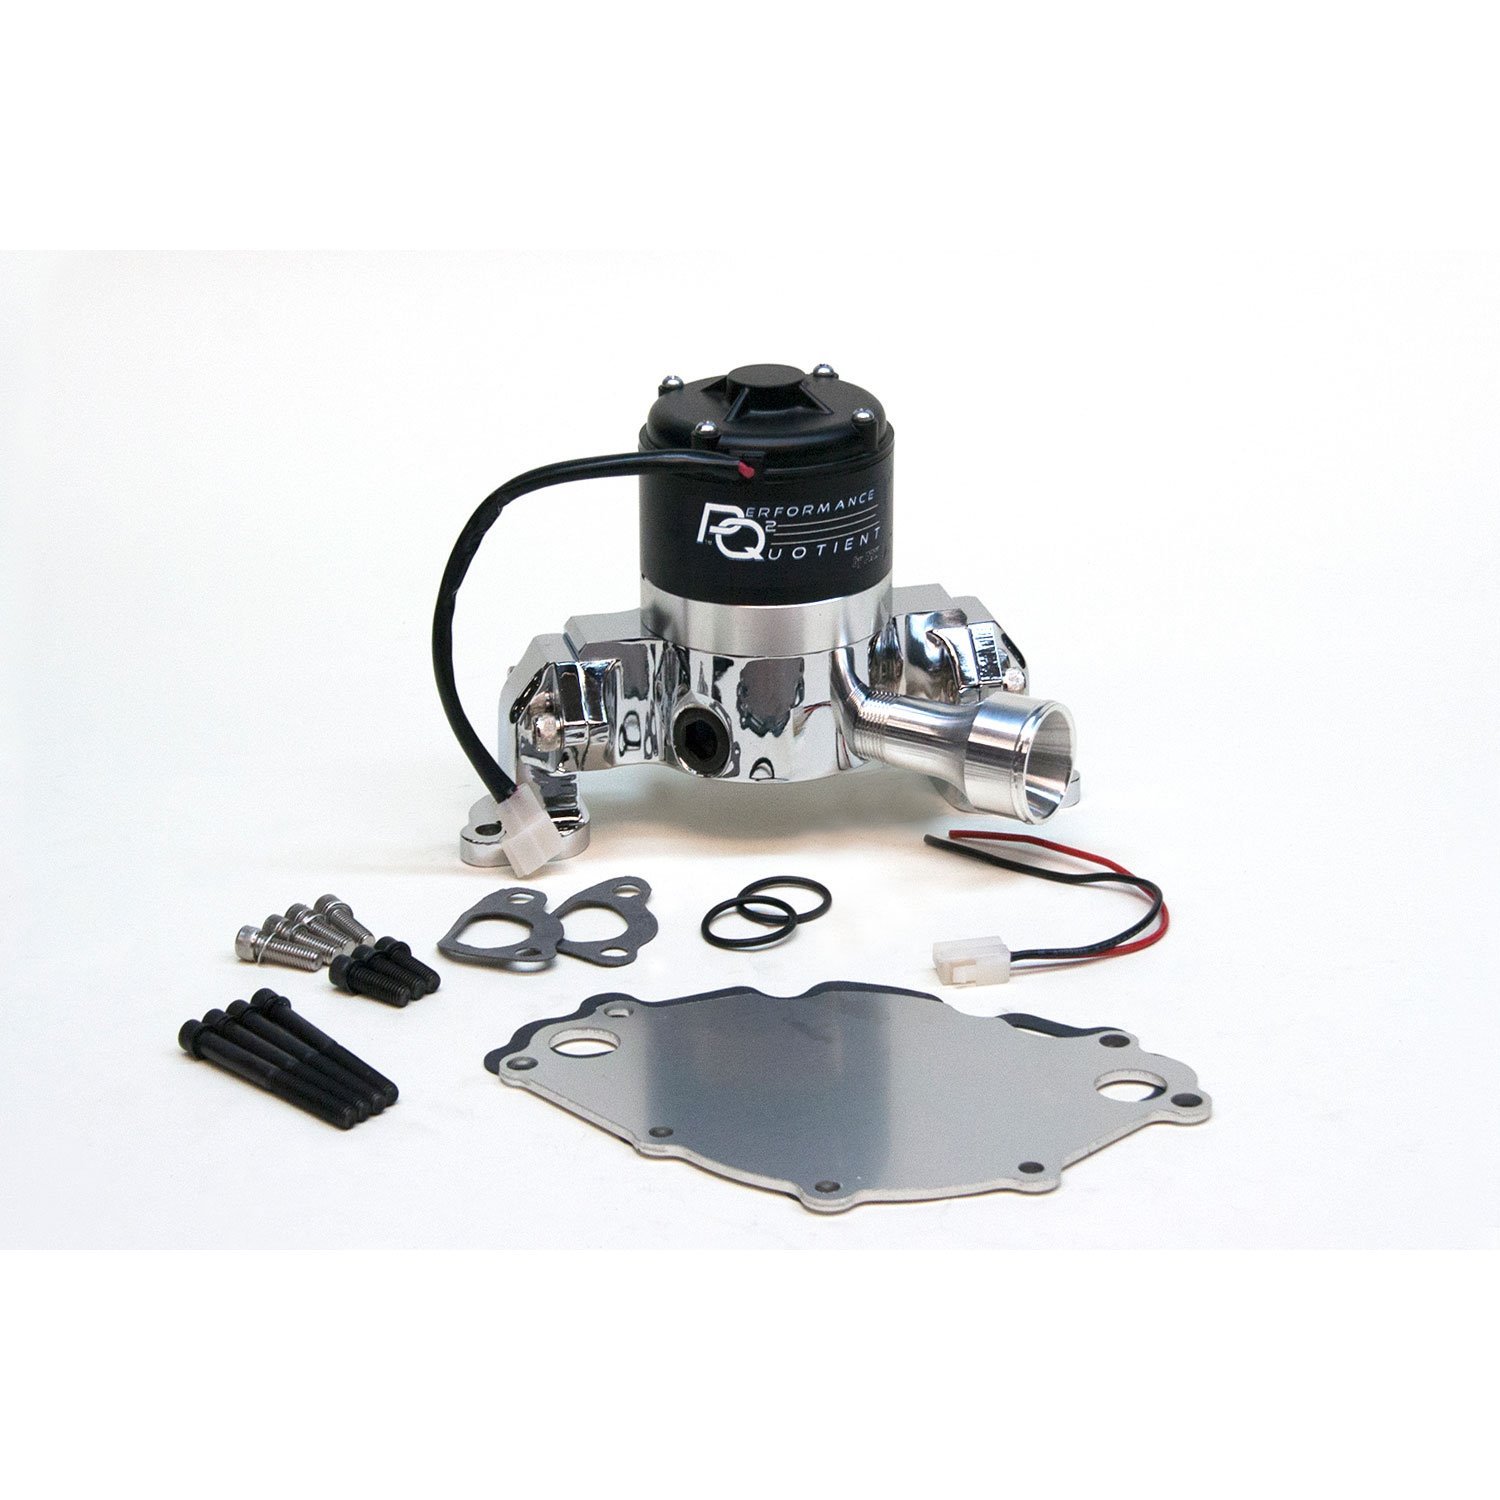 WATER PUMP ELEC RACE FORD SB 302-351W Chrome Kit Incl Alum Backplate Hardware / Pig Tail